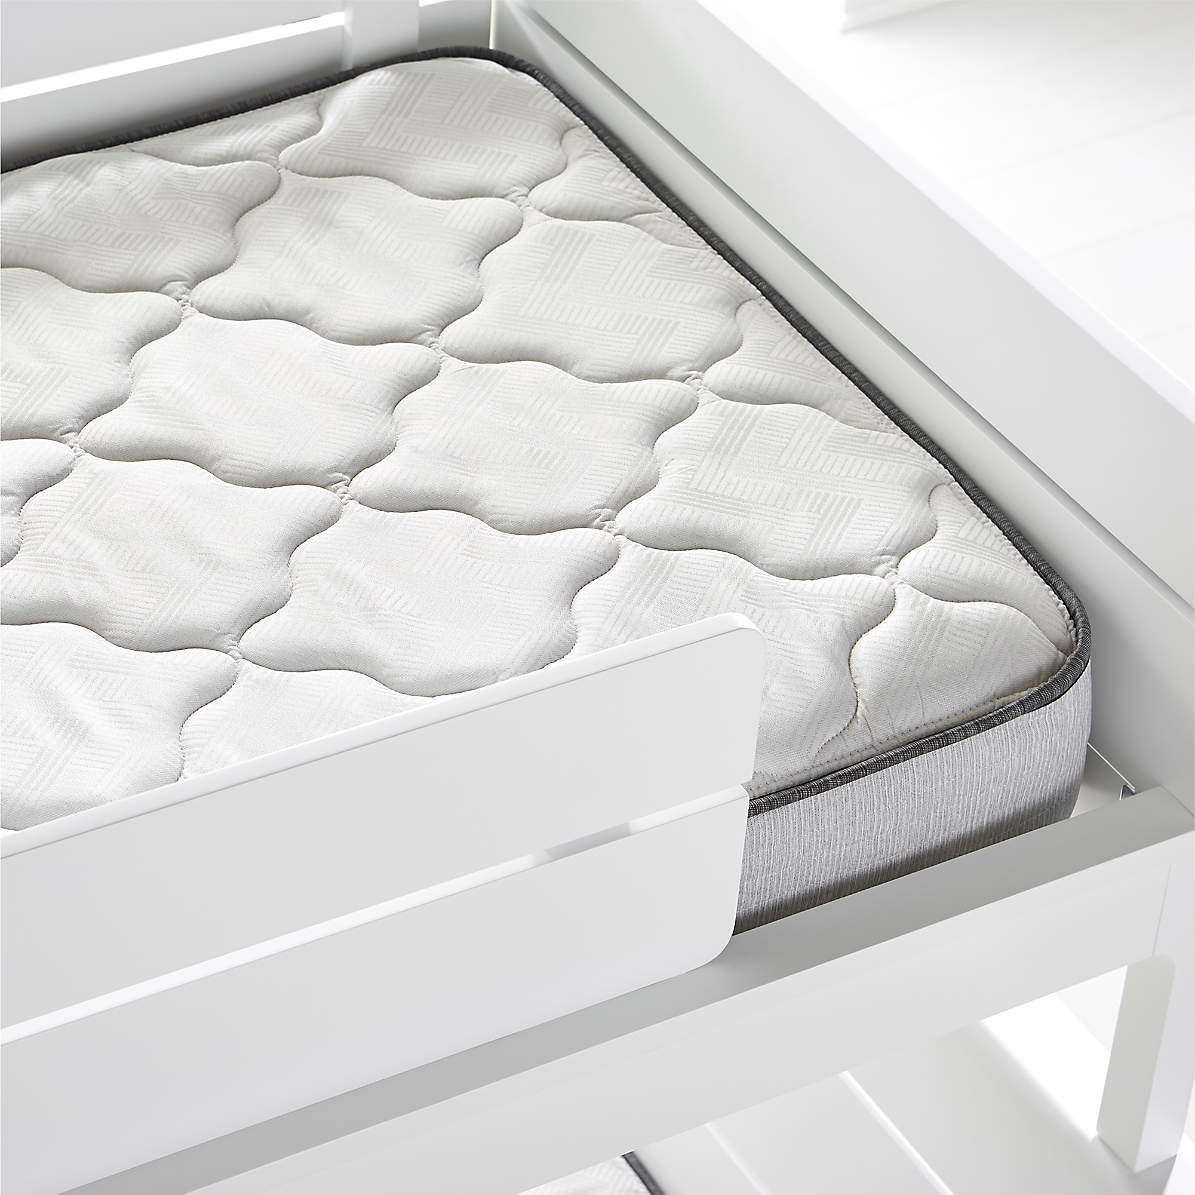 Simmons Bunk Bed Mattress Crate Kids, What Size Is A Bunk Bed Mattress